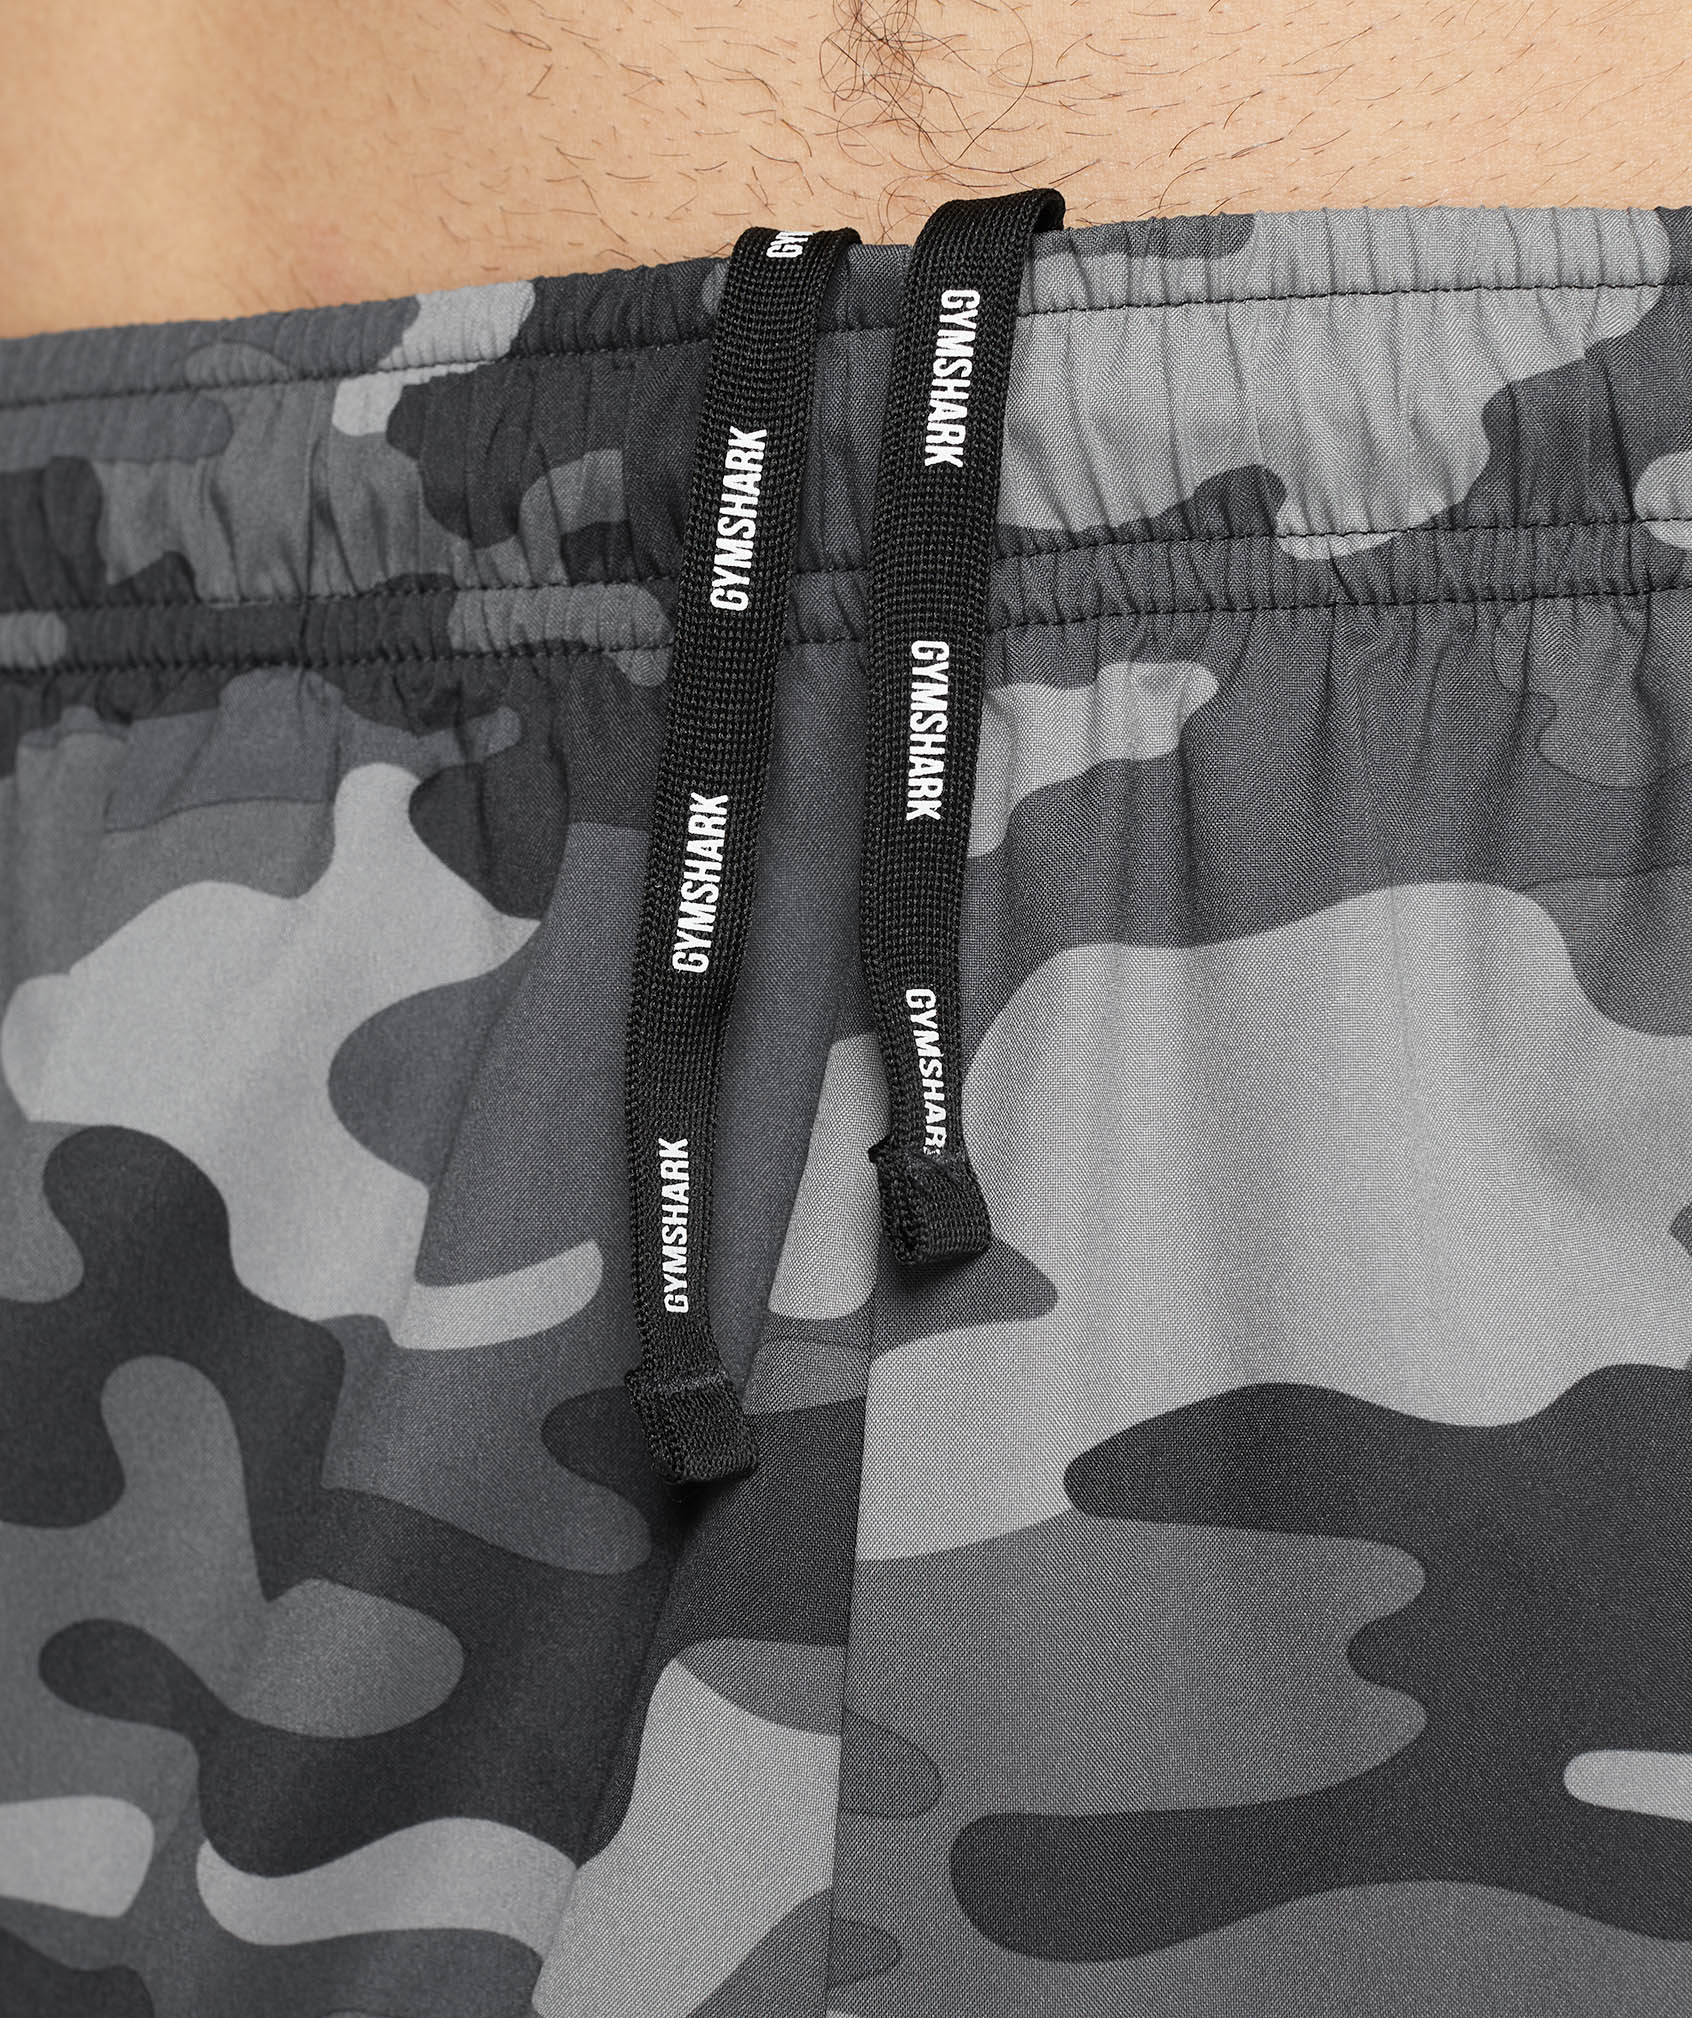 Arrival Shorts in Grey Print